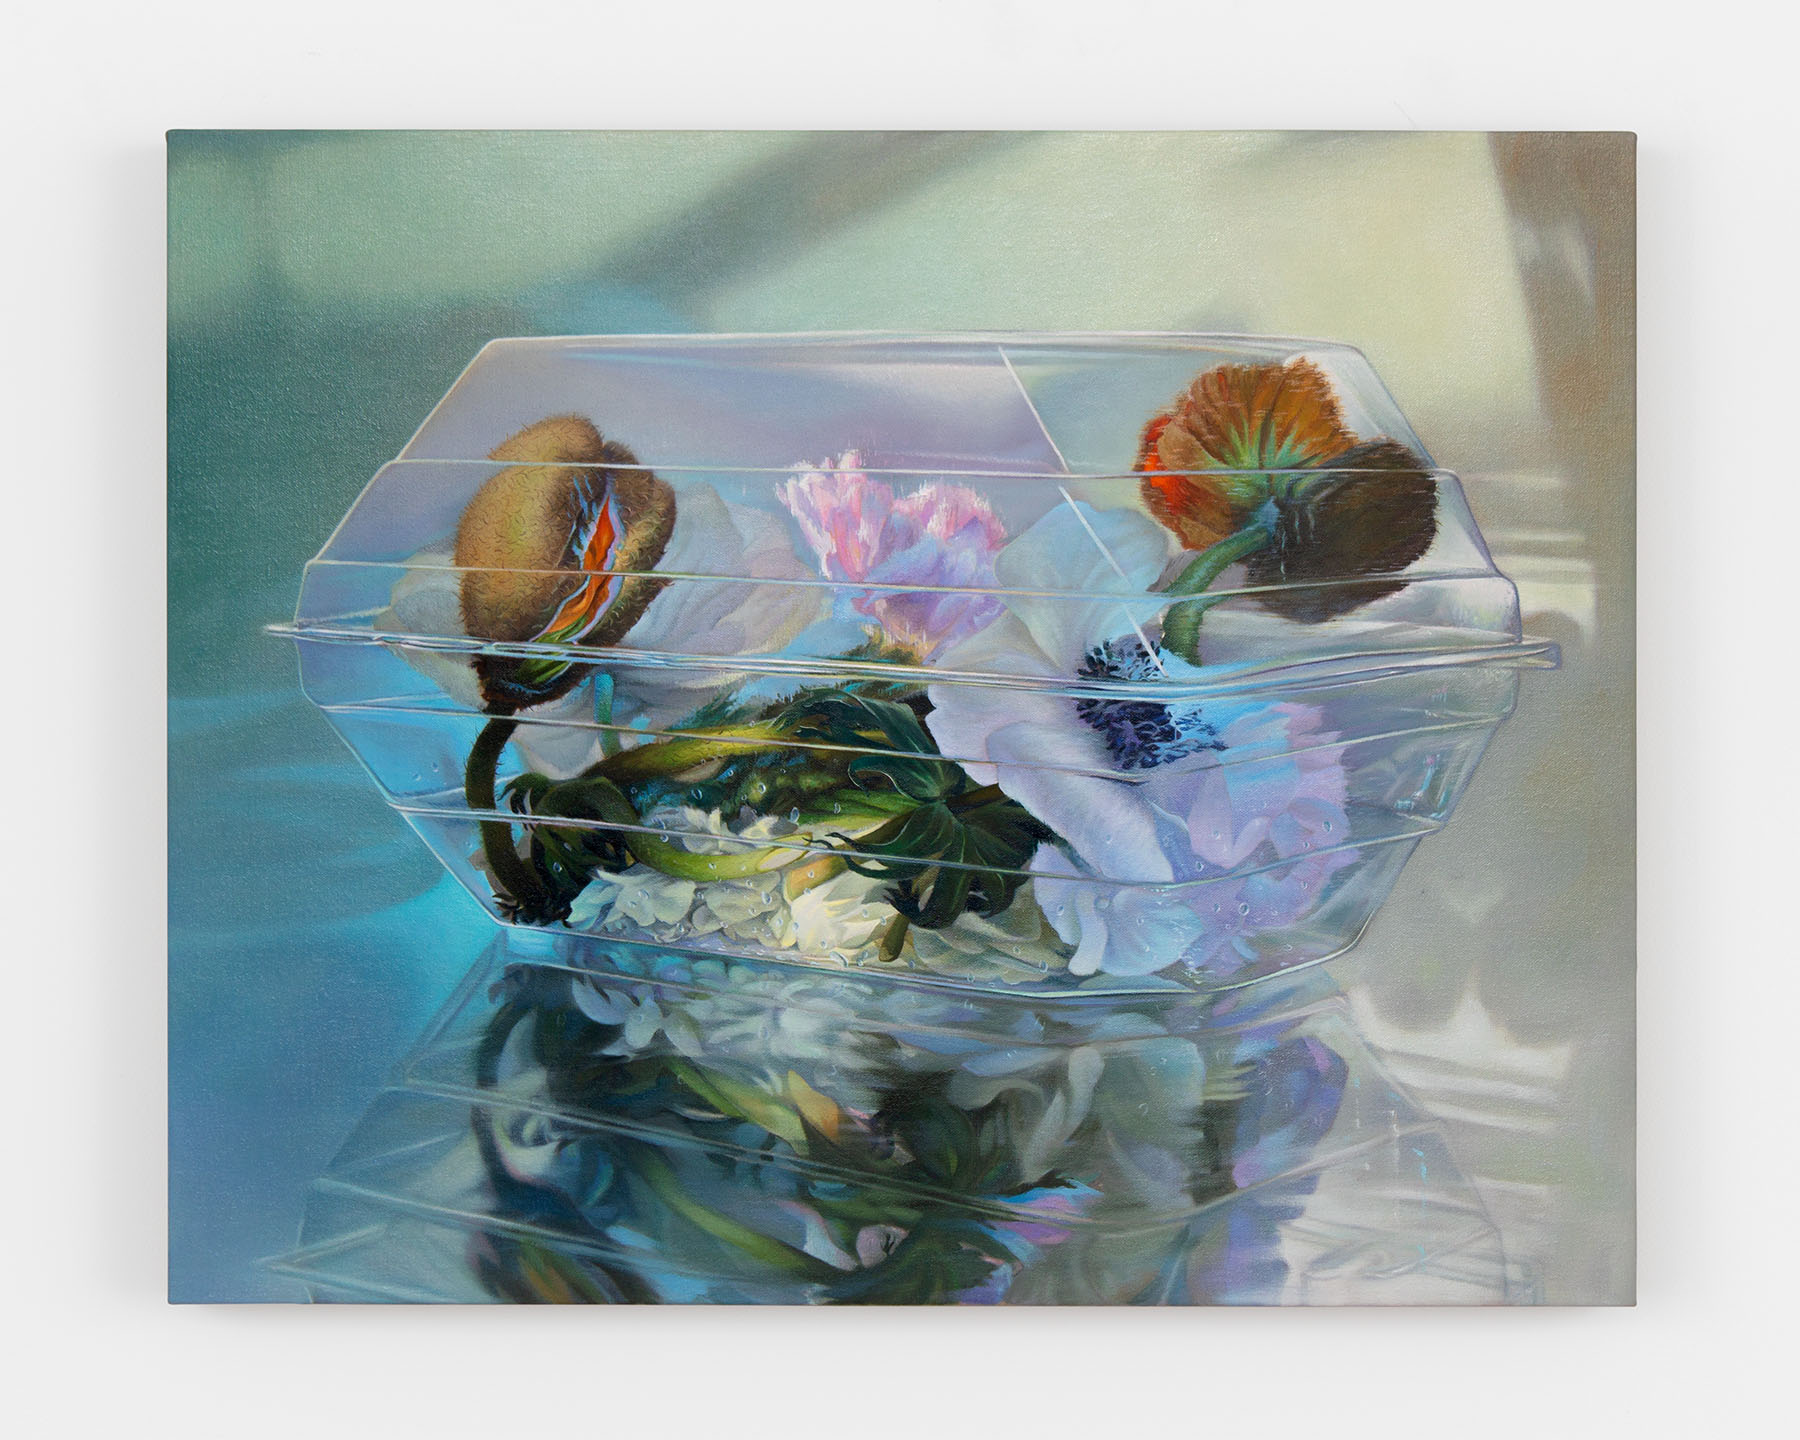 Chason Matthams, Corsage (aqua, blue, pink), 2022, Oil on linen over panel, 24h x 30w in.